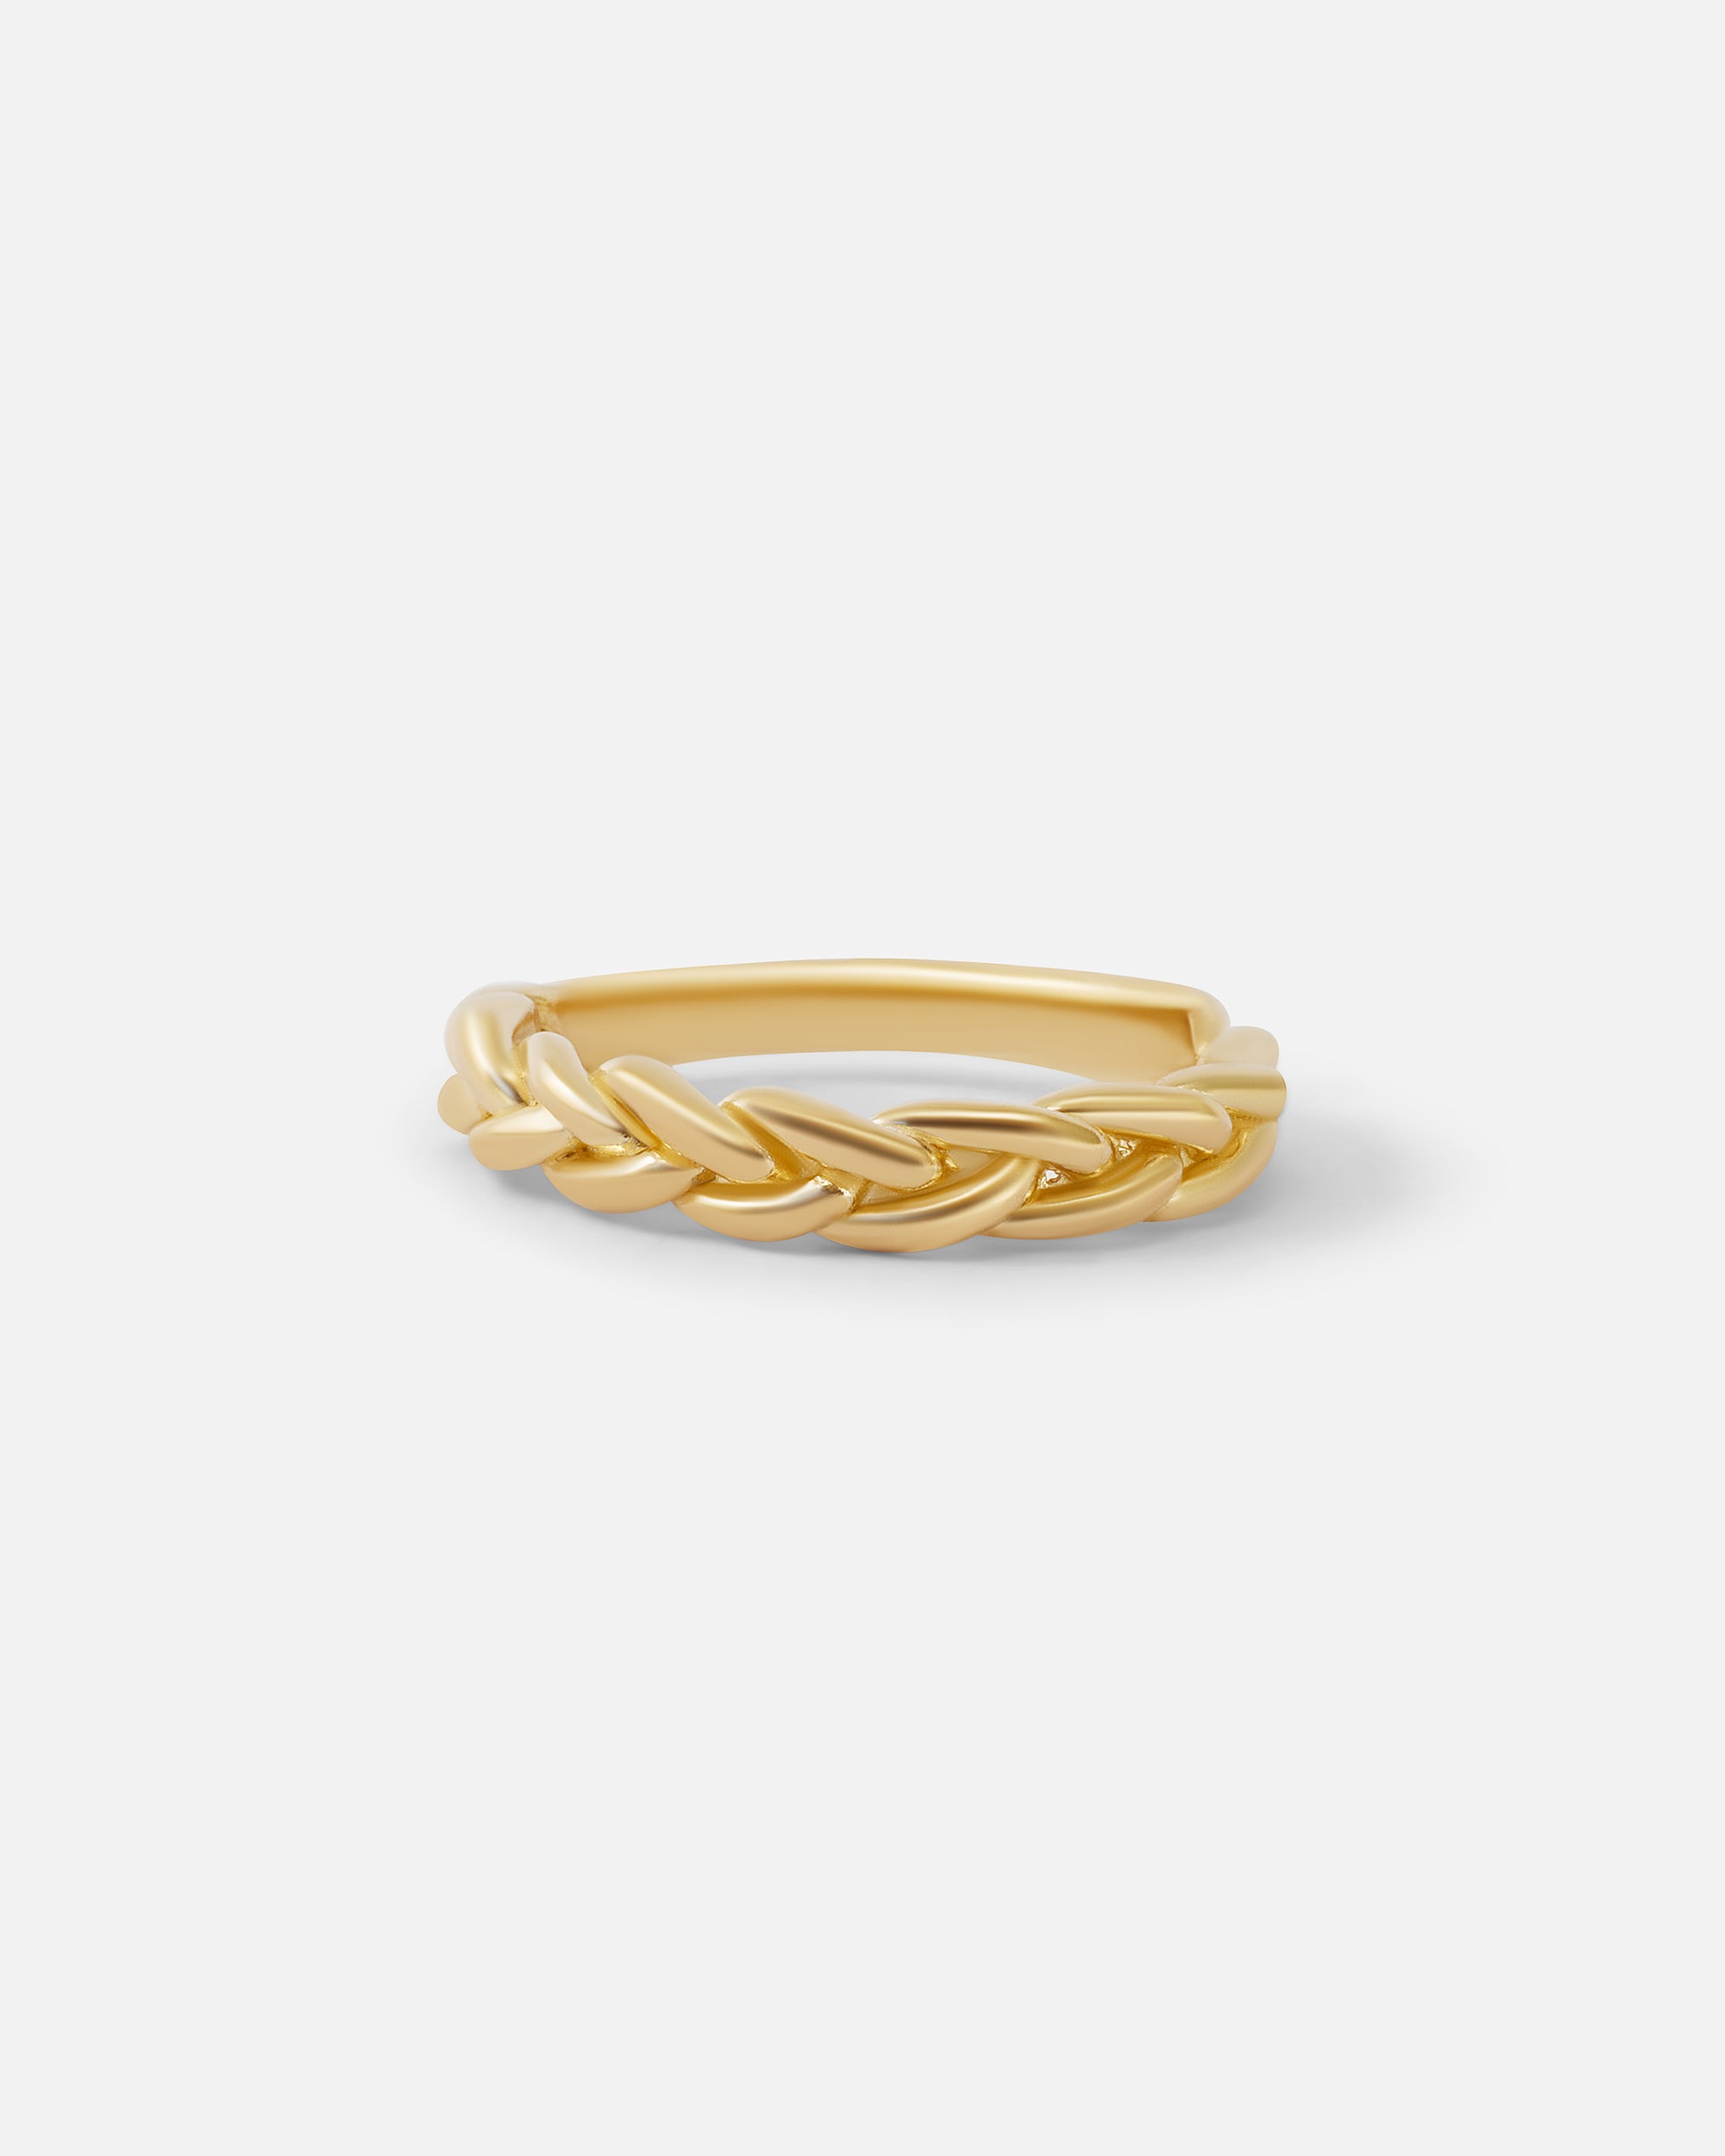 Gradus / Ring By Alfonzo in Wedding Bands Category